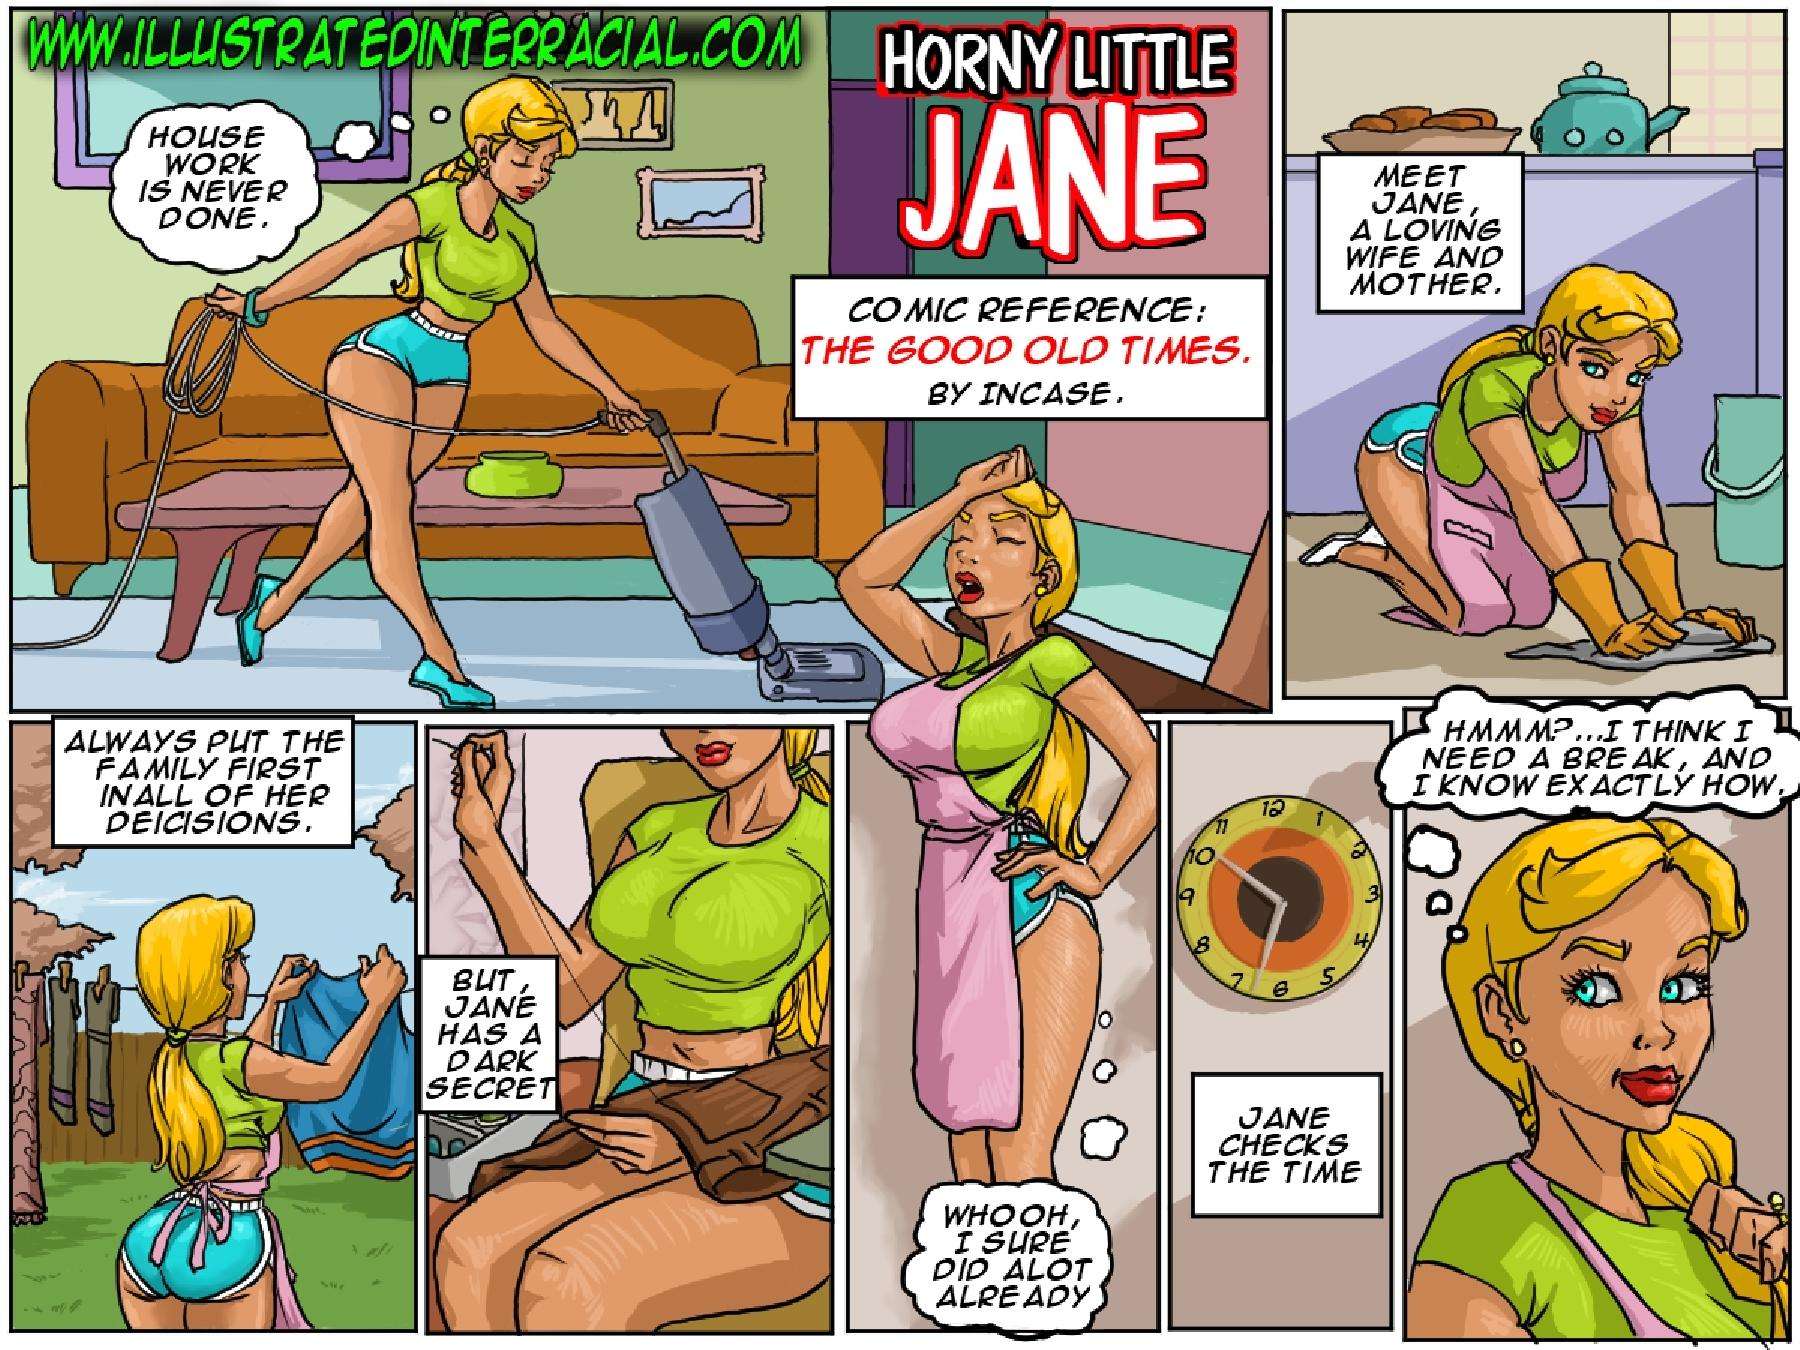 Illustrated Interracial – Horny Little Jane